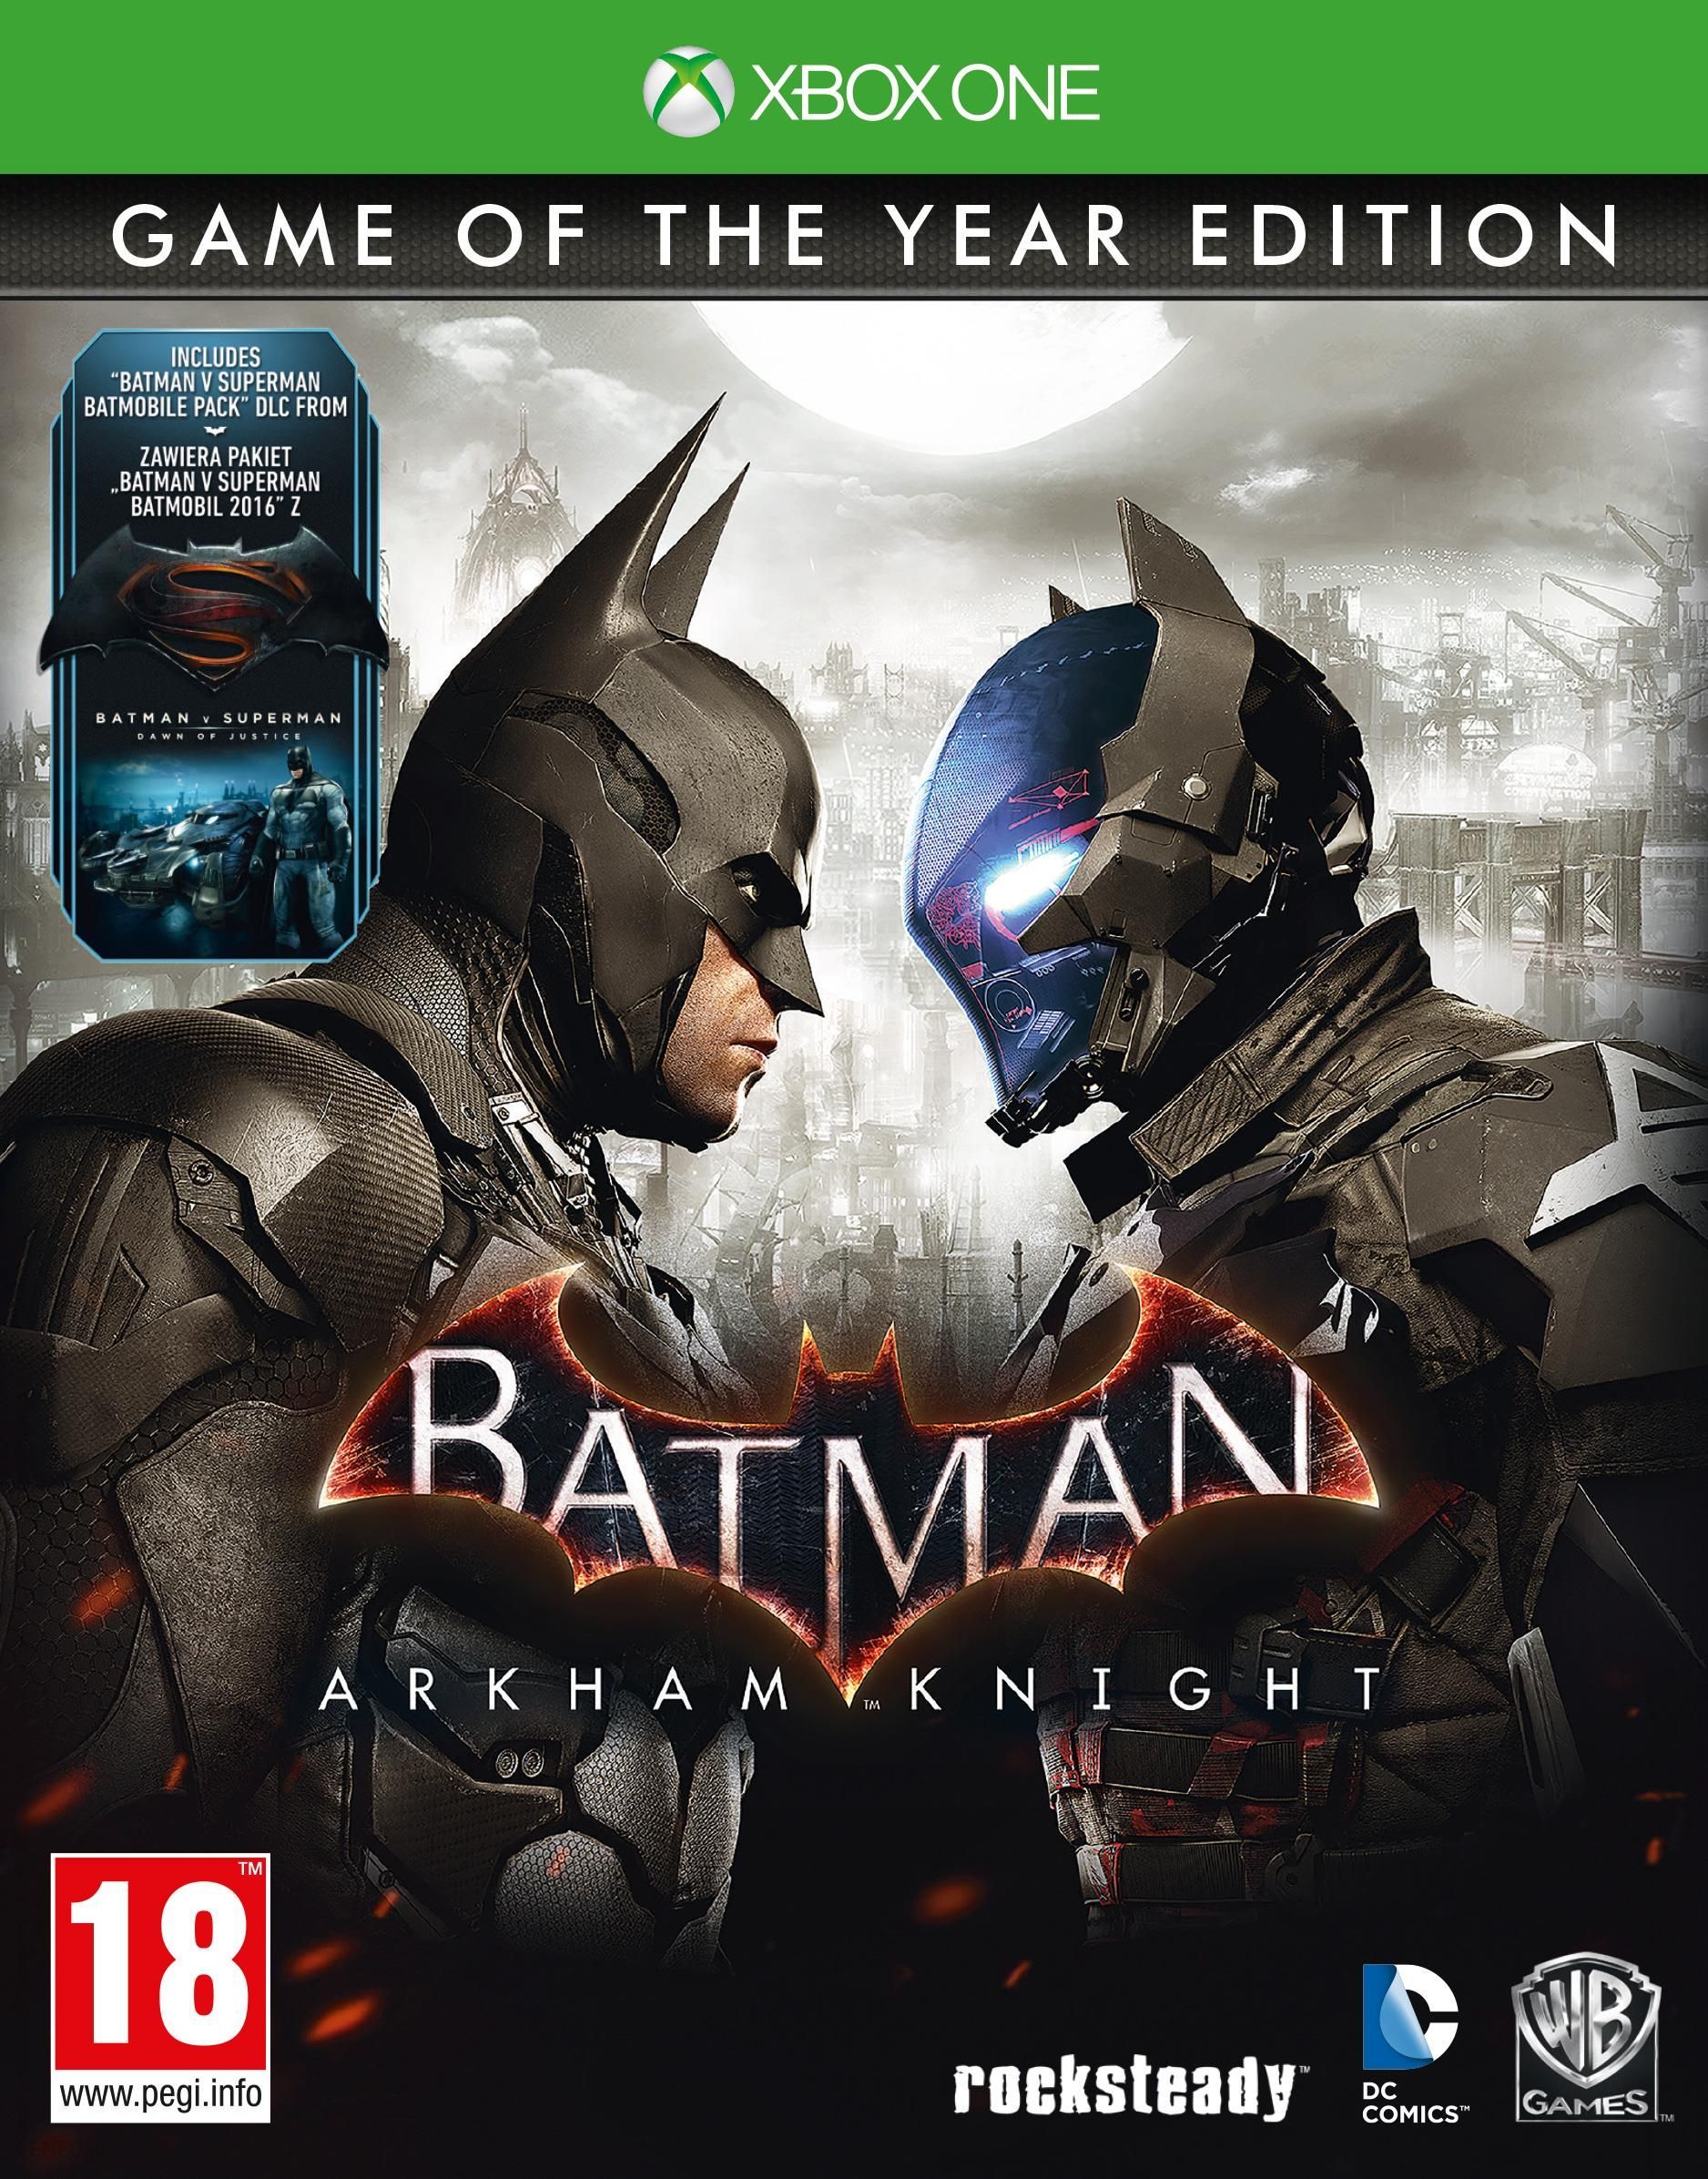 Batman: Arkham Knight - Game of the Year Edition (Xbox One)(New) | Buy from  Pwned Games with confidence. | Xbox One Games [new]